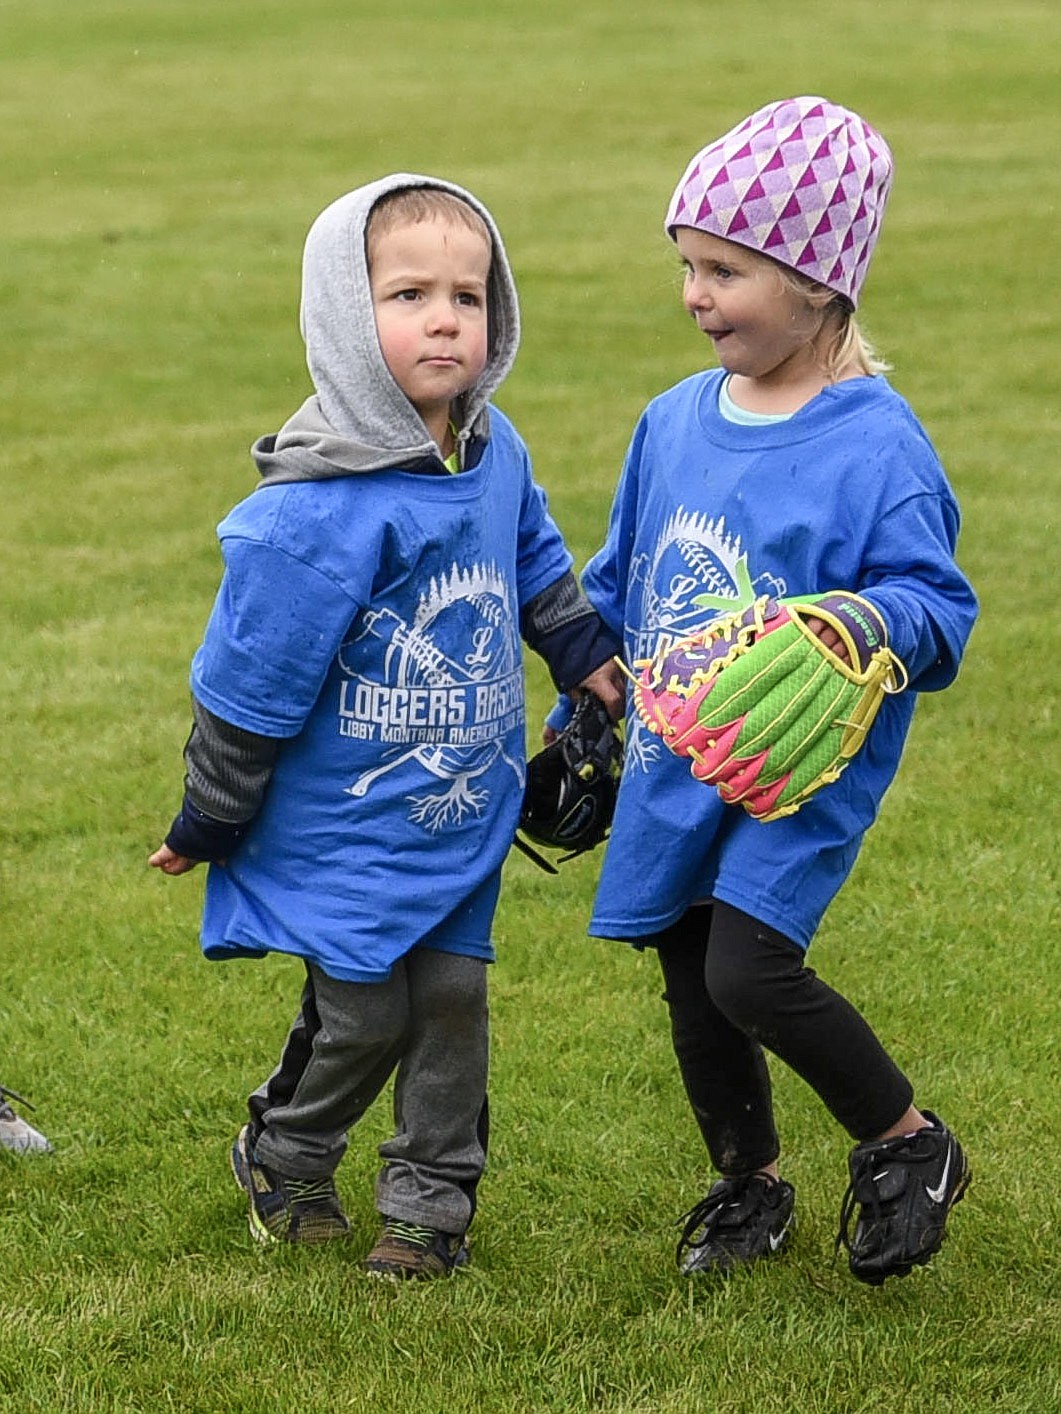 Maverick Grotjohn and Emerson Spencer get ready to practice fielding a ground ball at the Libby Loggers Kids Camp Saturday at Lee Gehring Field. (Ben Kibbey/The Western News)